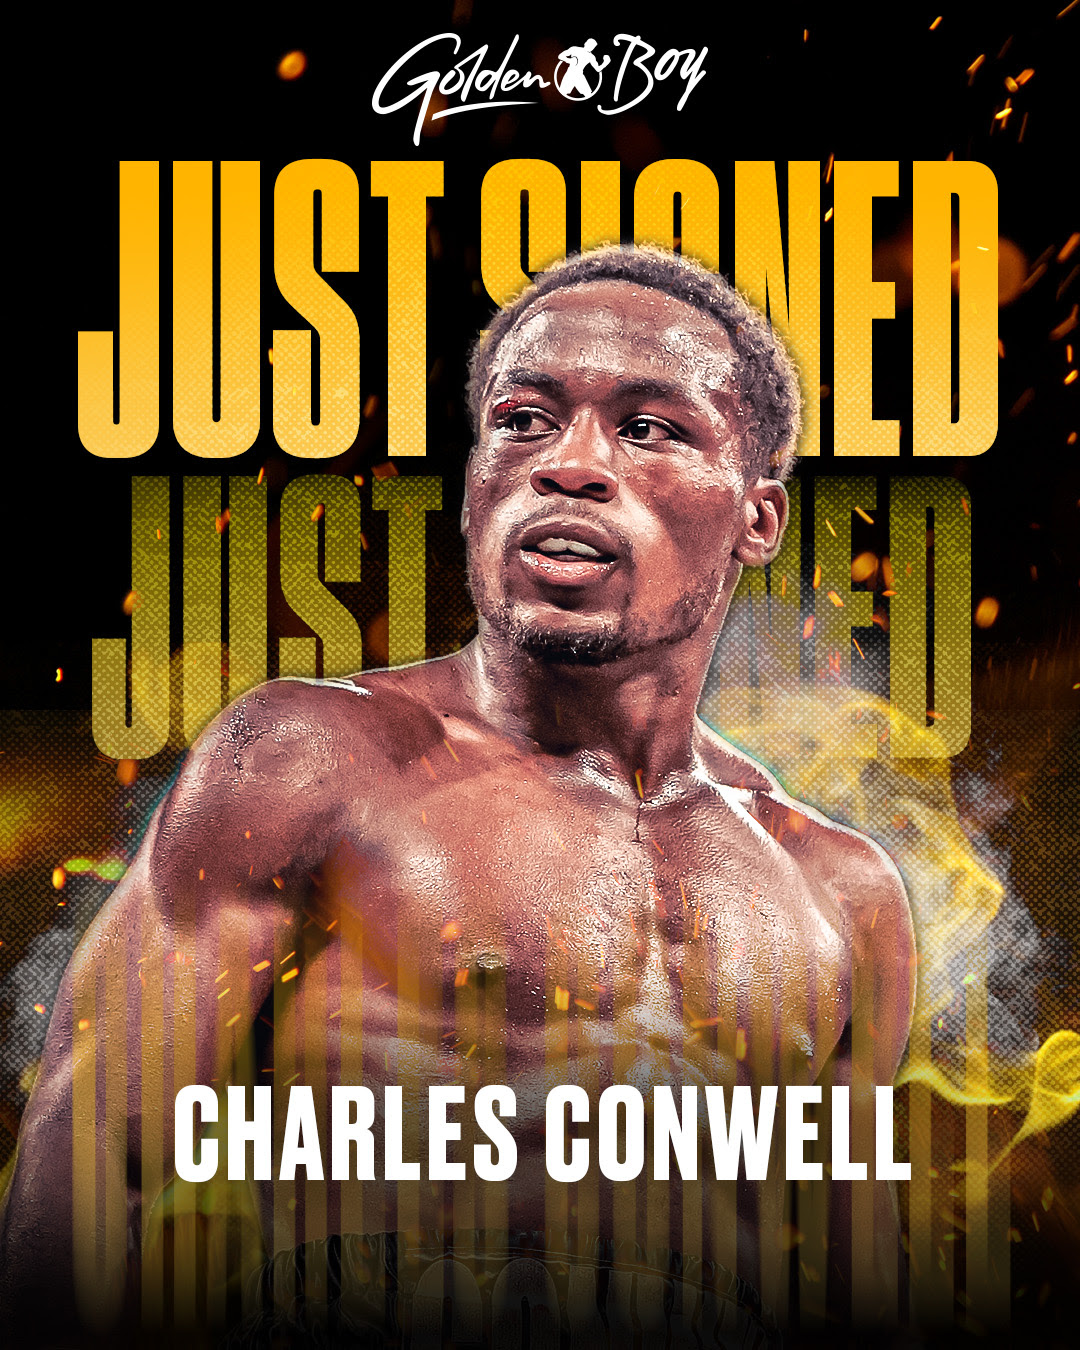 Conwell firma con Golden Boy Promotions